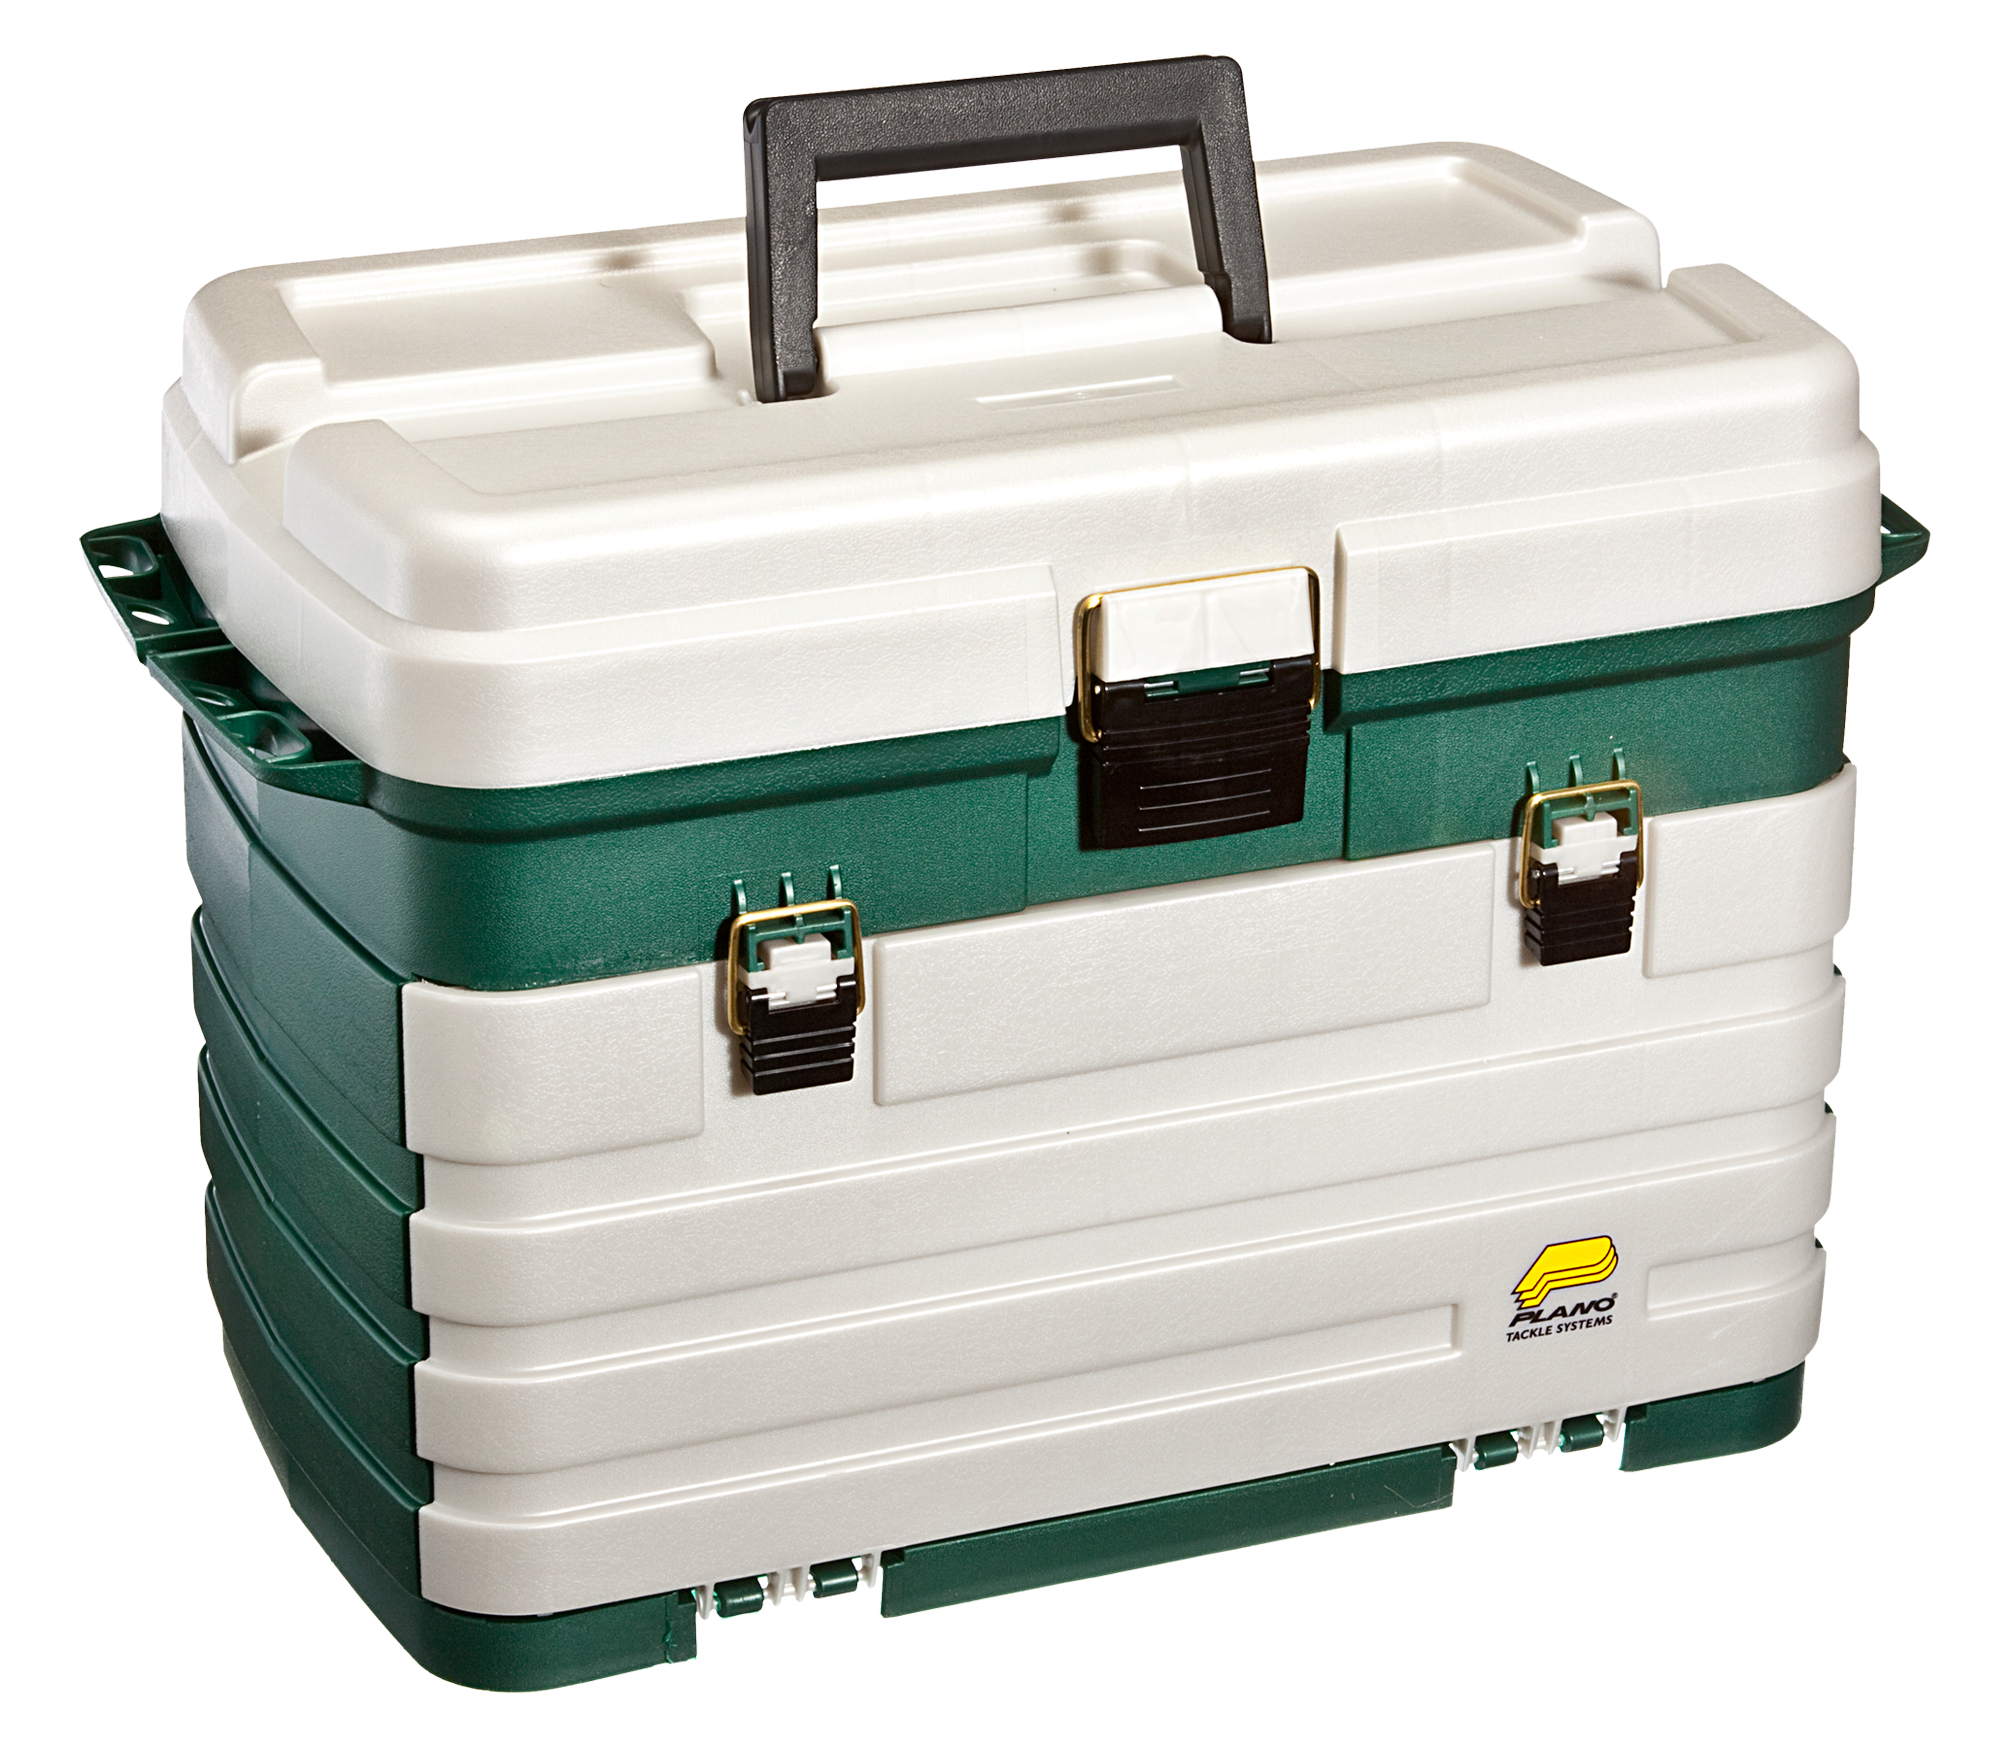 Wholesale plano tackle box To Store Your Fishing Gear 